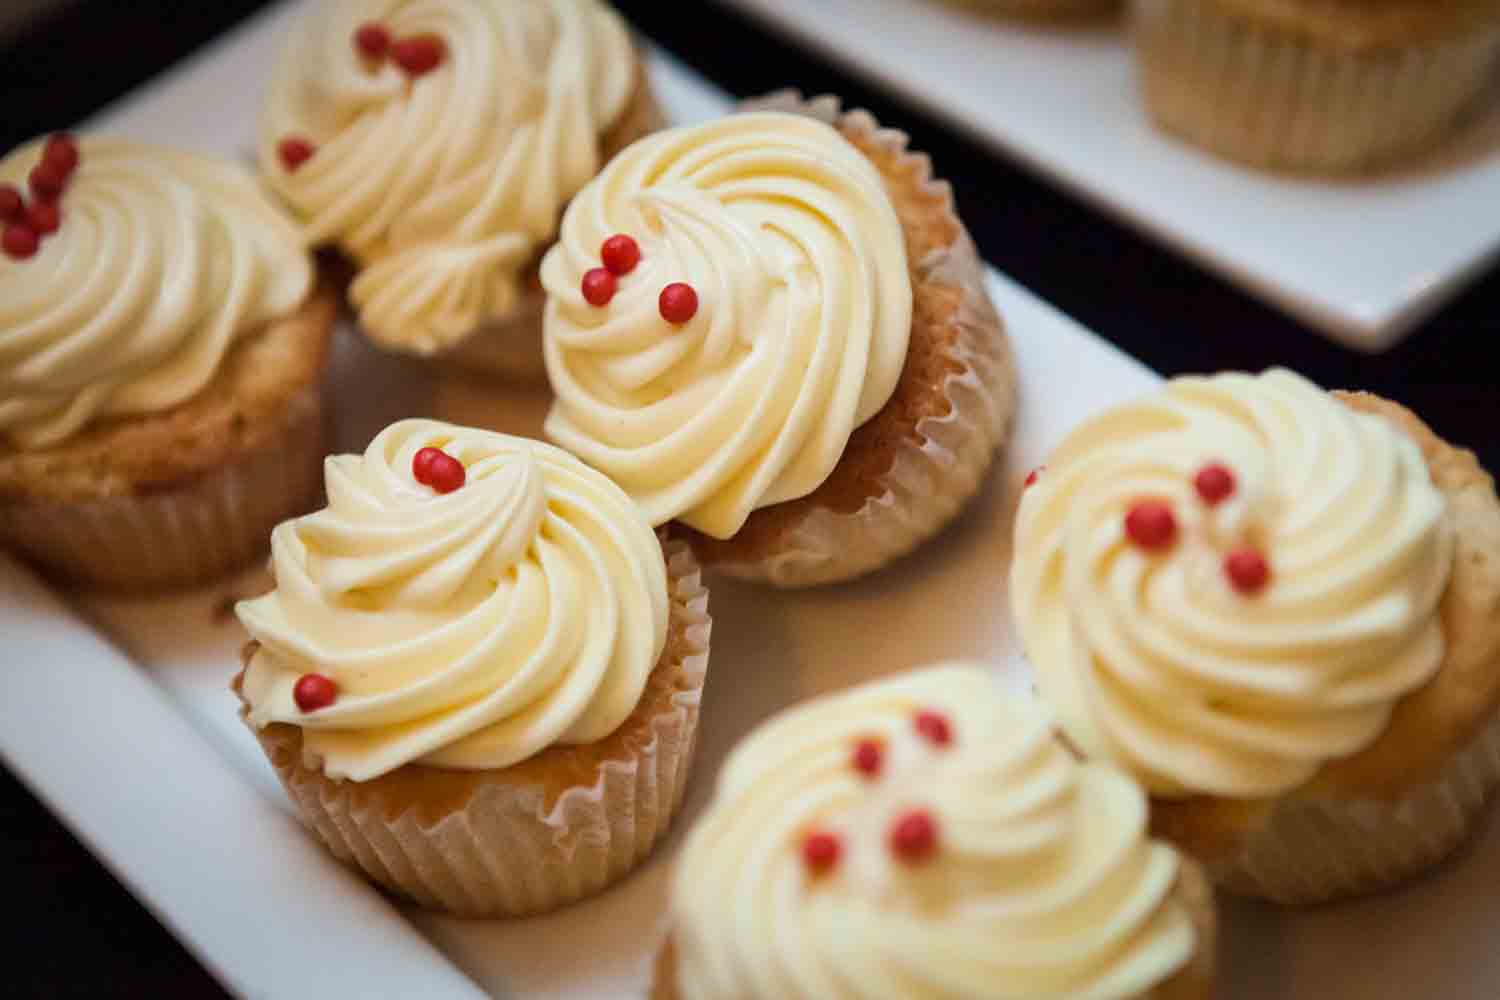 Close up on cupcakes with yellow frosting and red sprinkles